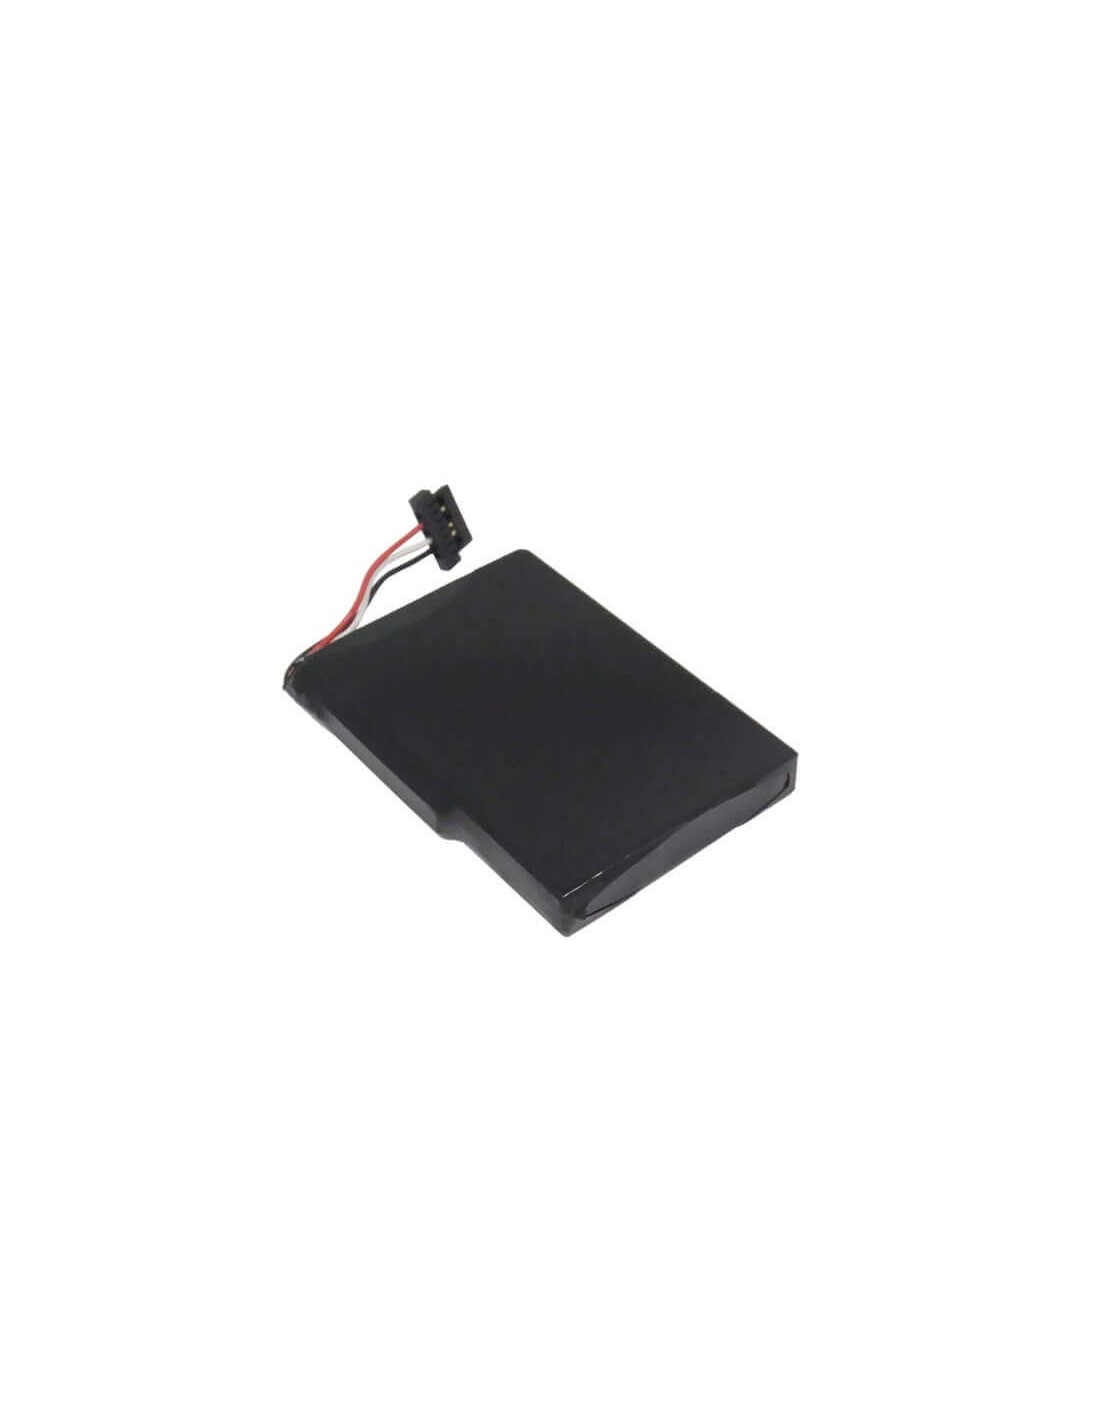 Battery for Jucon Gps-3741 3.7V, 1400mAh - 5.18Wh